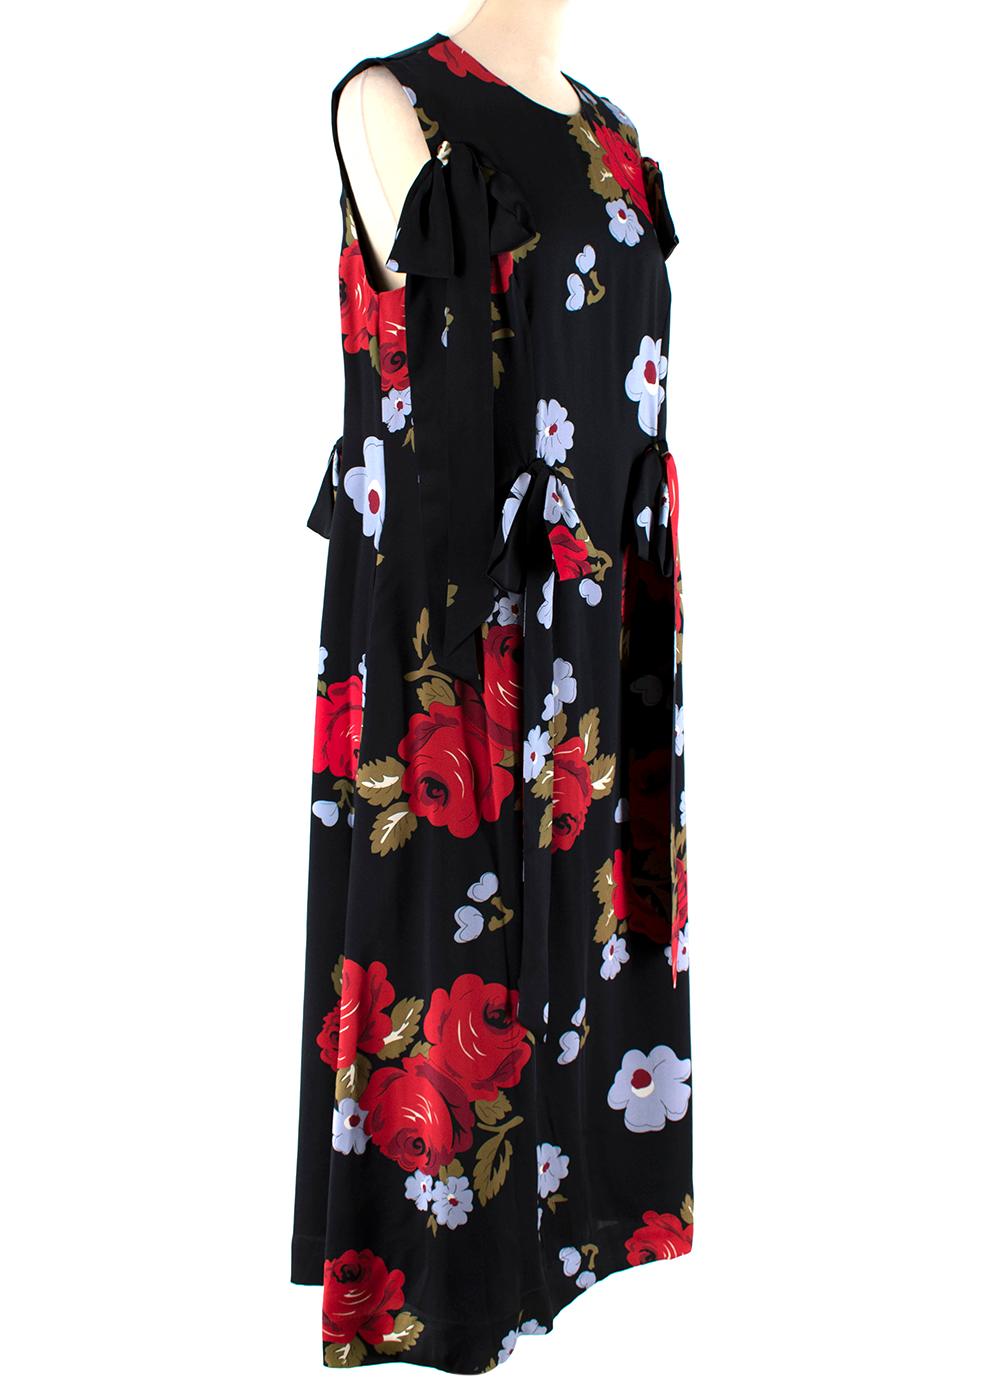 Simone Rocha Black Multi-coloured Floral Pattern Dress

- Bow details 
- Floral pattern all over 
- Round neck
- Sleeveless design
- Invisible rear zip fastening 
- Shift silhouette
- Side slip pockets
- Maxi length
- Lined 

Materials:
Main